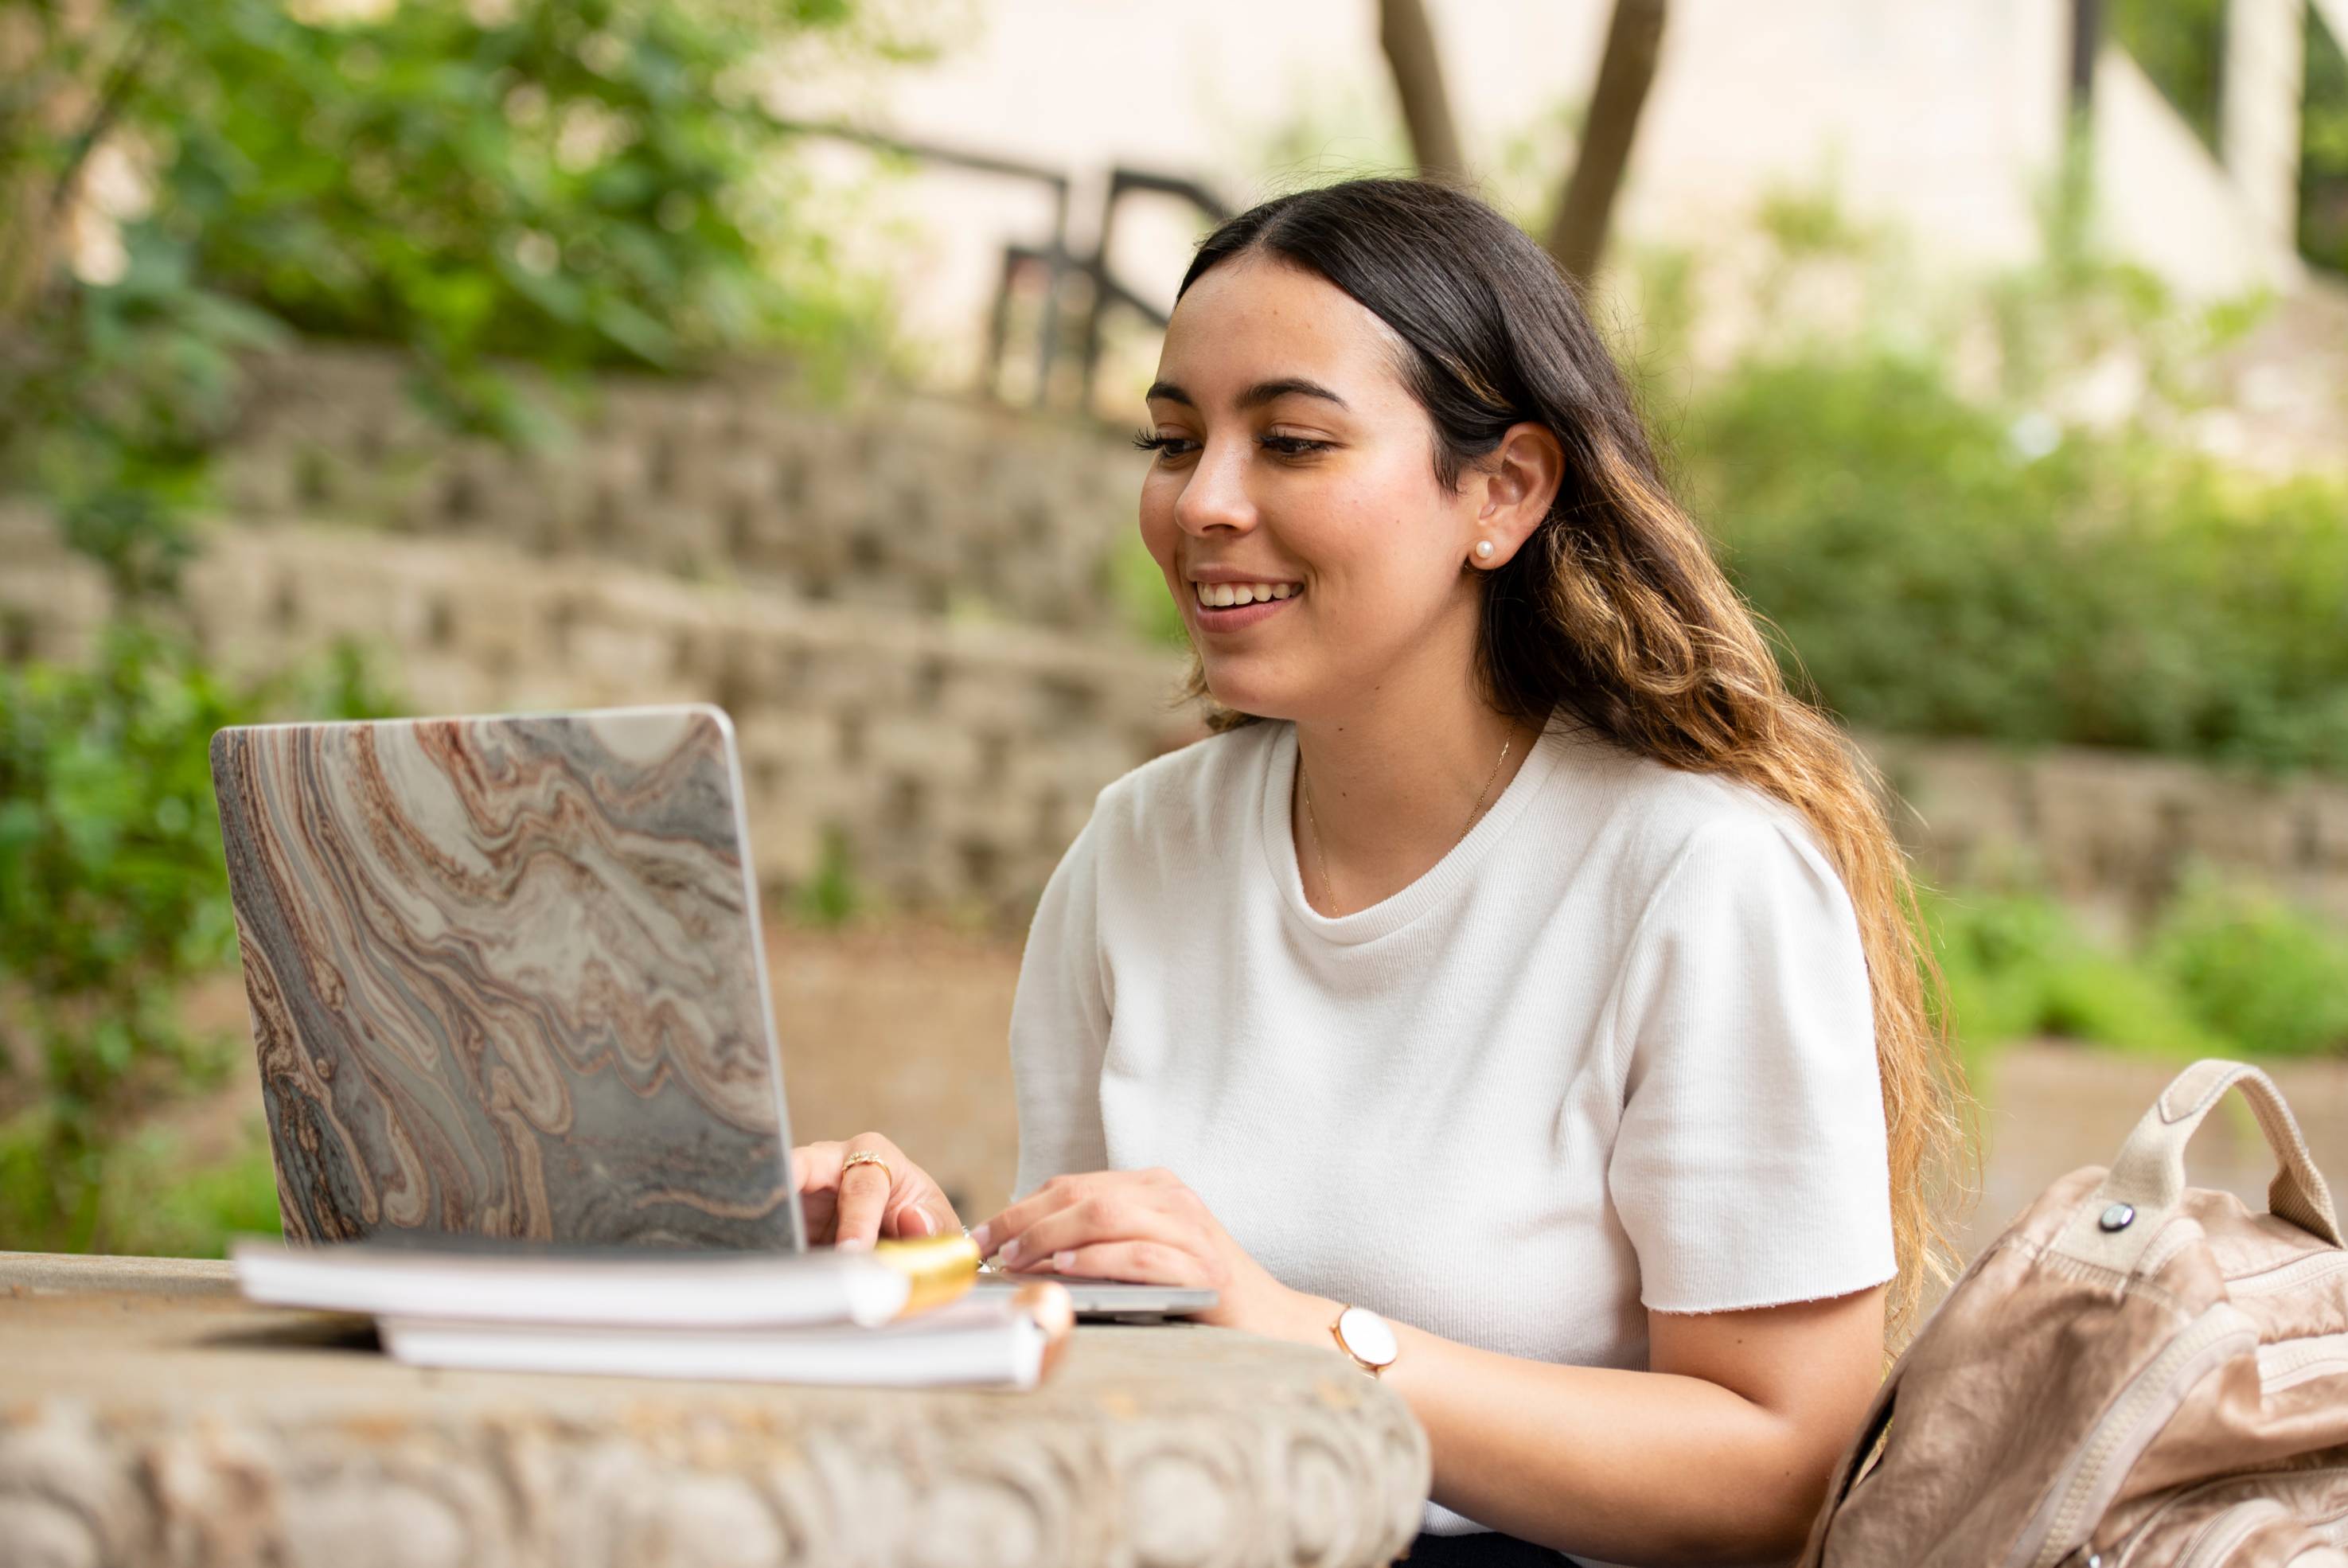 Texas State student smiling on laptop